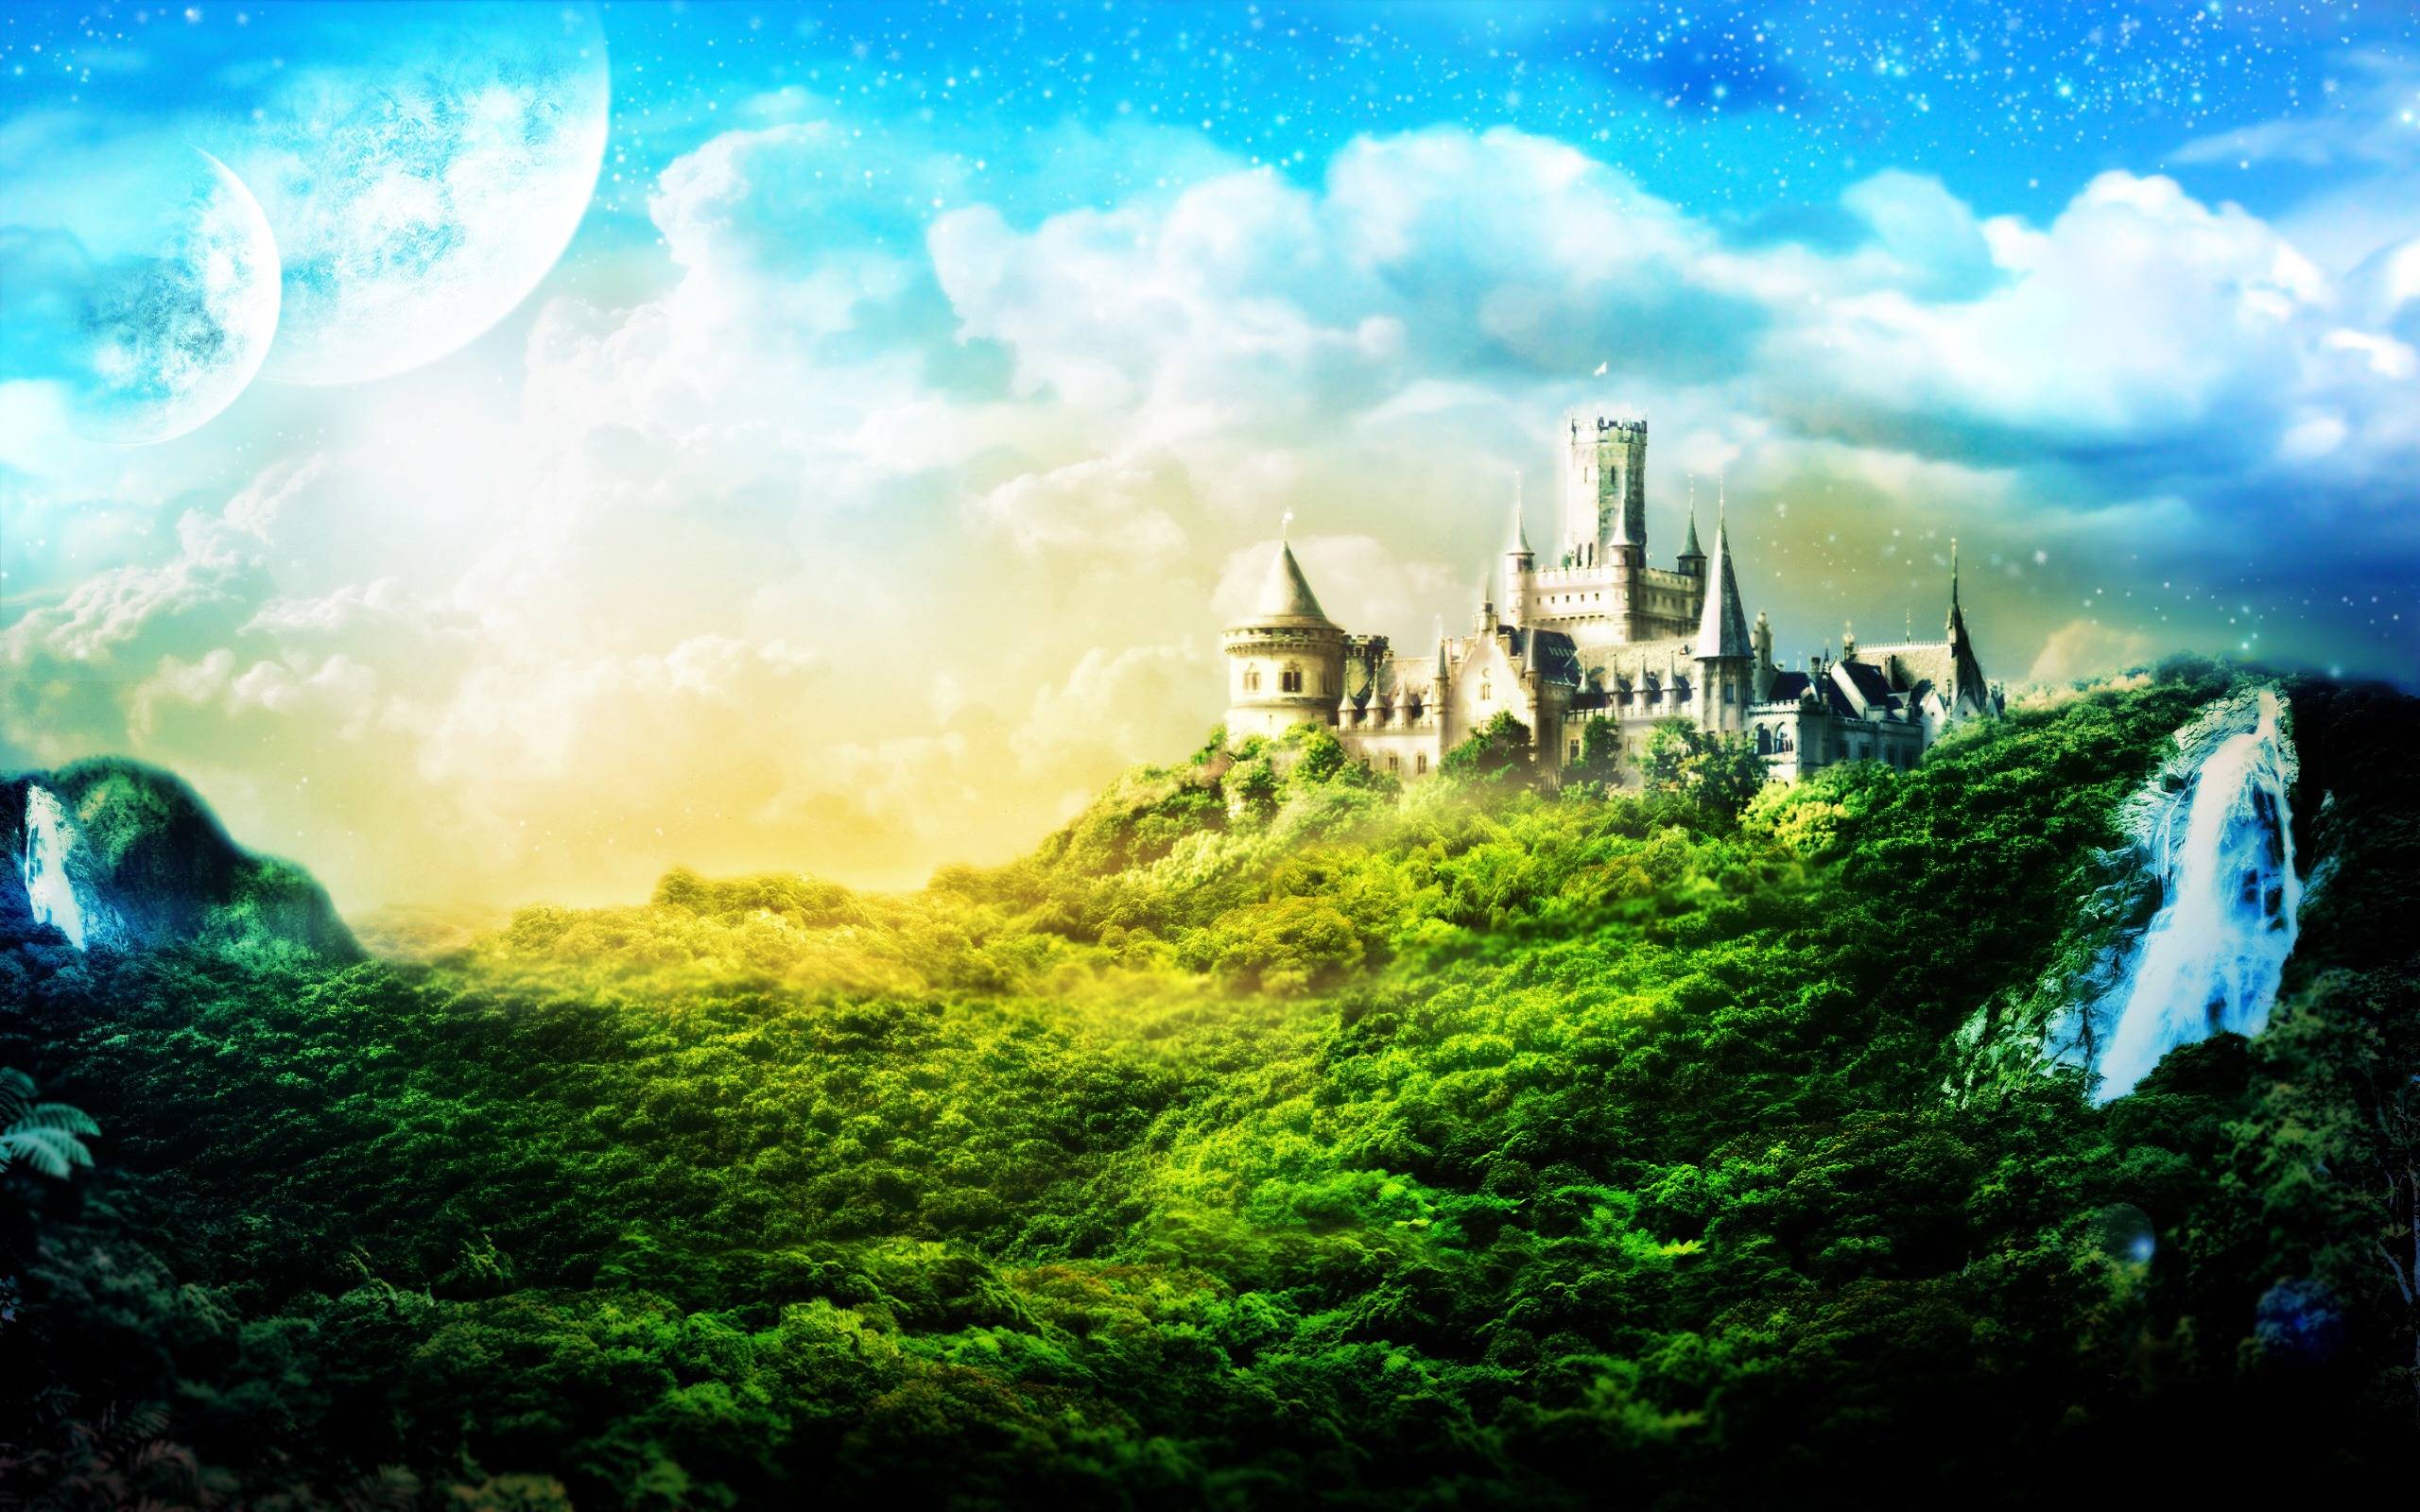 Photoshop_The_castle_from_a_